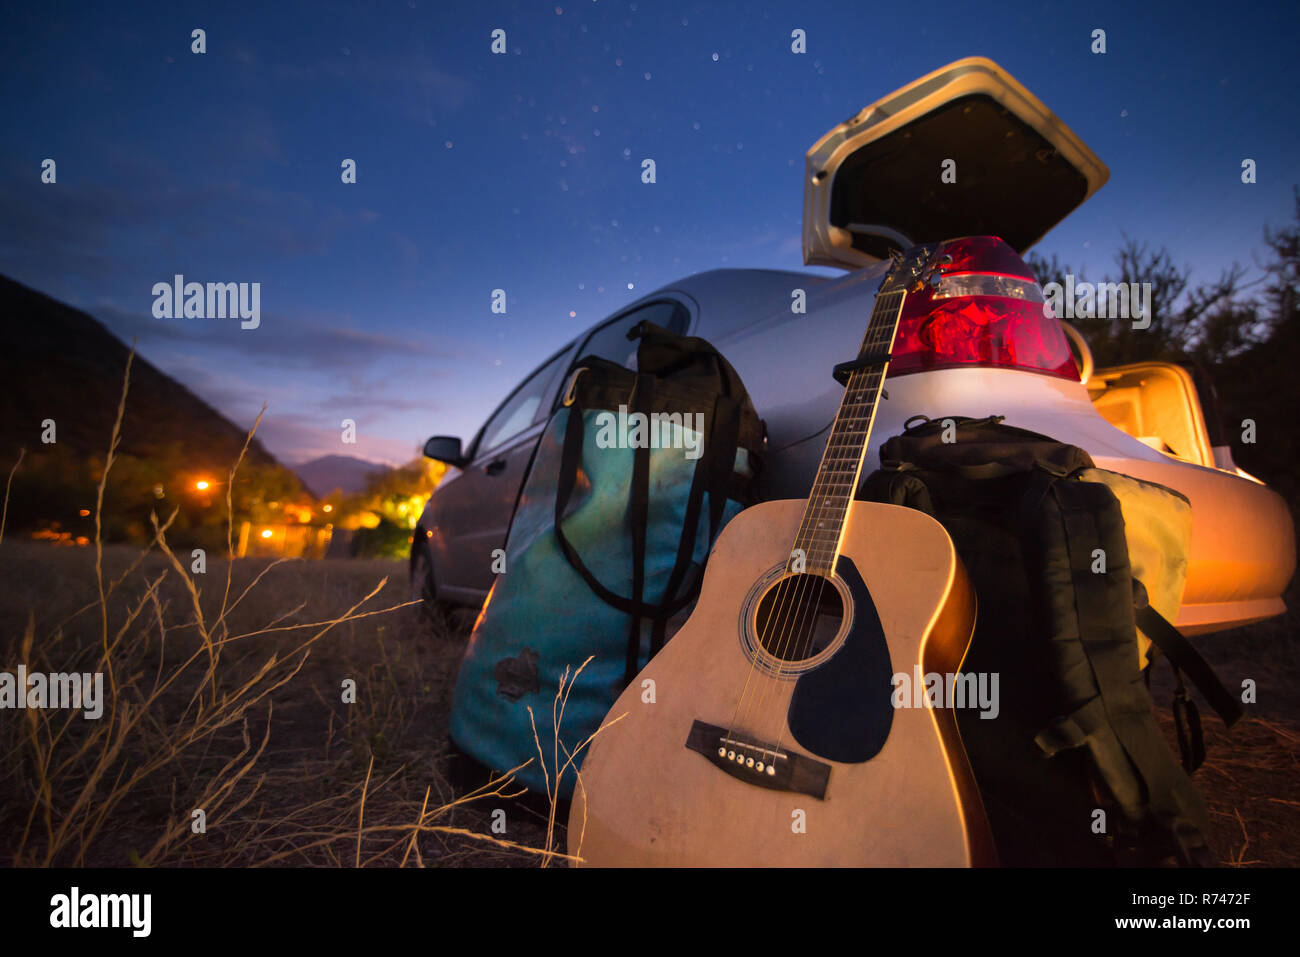 Guitar, backpack and luggage by car boot Stock Photo